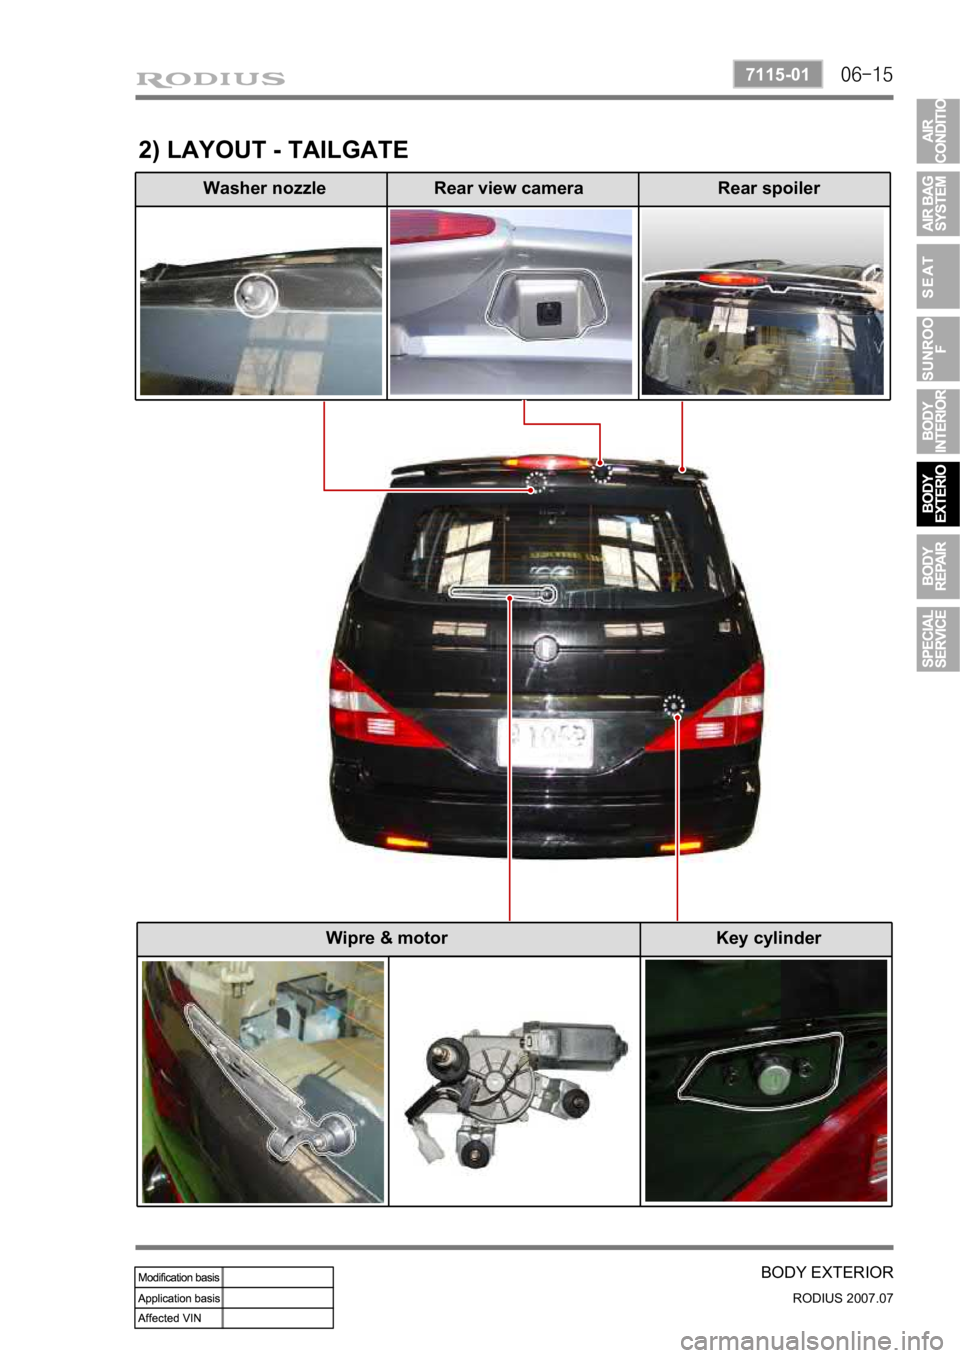 SSANGYONG RODIUS 2006  Service Manual 06-15
BODY EXTERIOR
RODIUS 2007.07
7115-01
2) LAYOUT - TAILGATE
Washer nozzle Rear view camera Rear spoiler Wipre & motor Key cylinder 